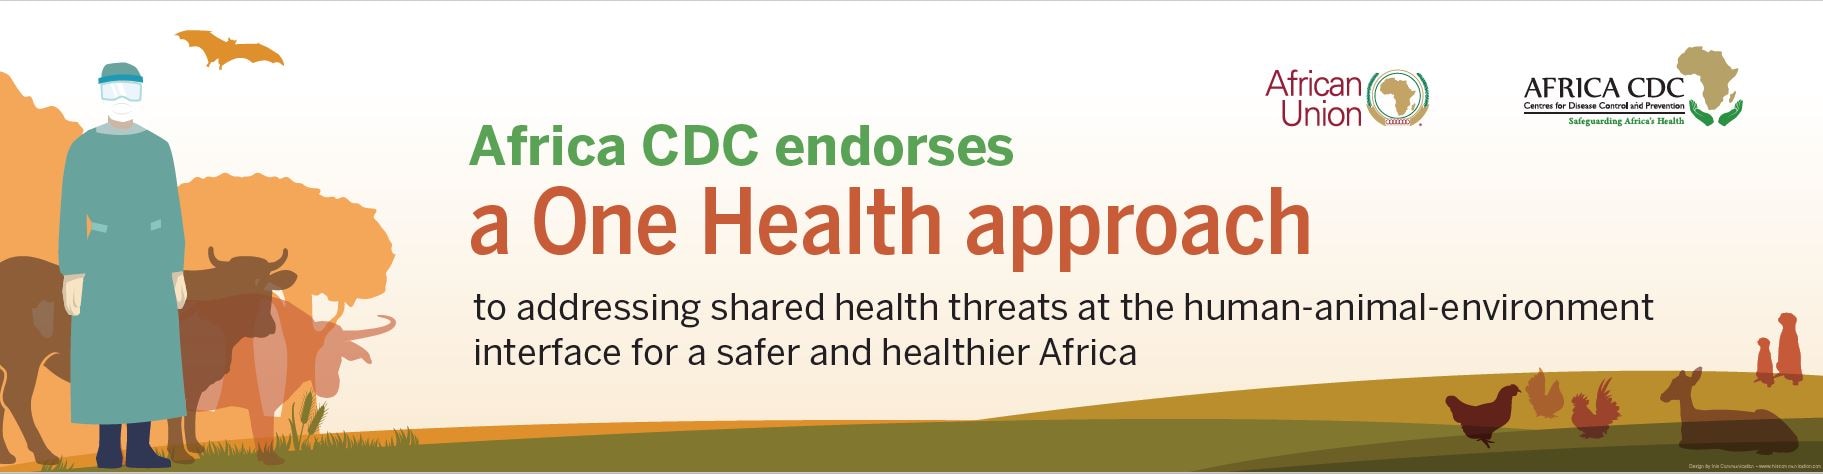 Africa CDC endorses a One Health approach to addressing shared health threats at the human-animal-environment interface for a safer and healthier Africa. African Union and Africa CDC logos.